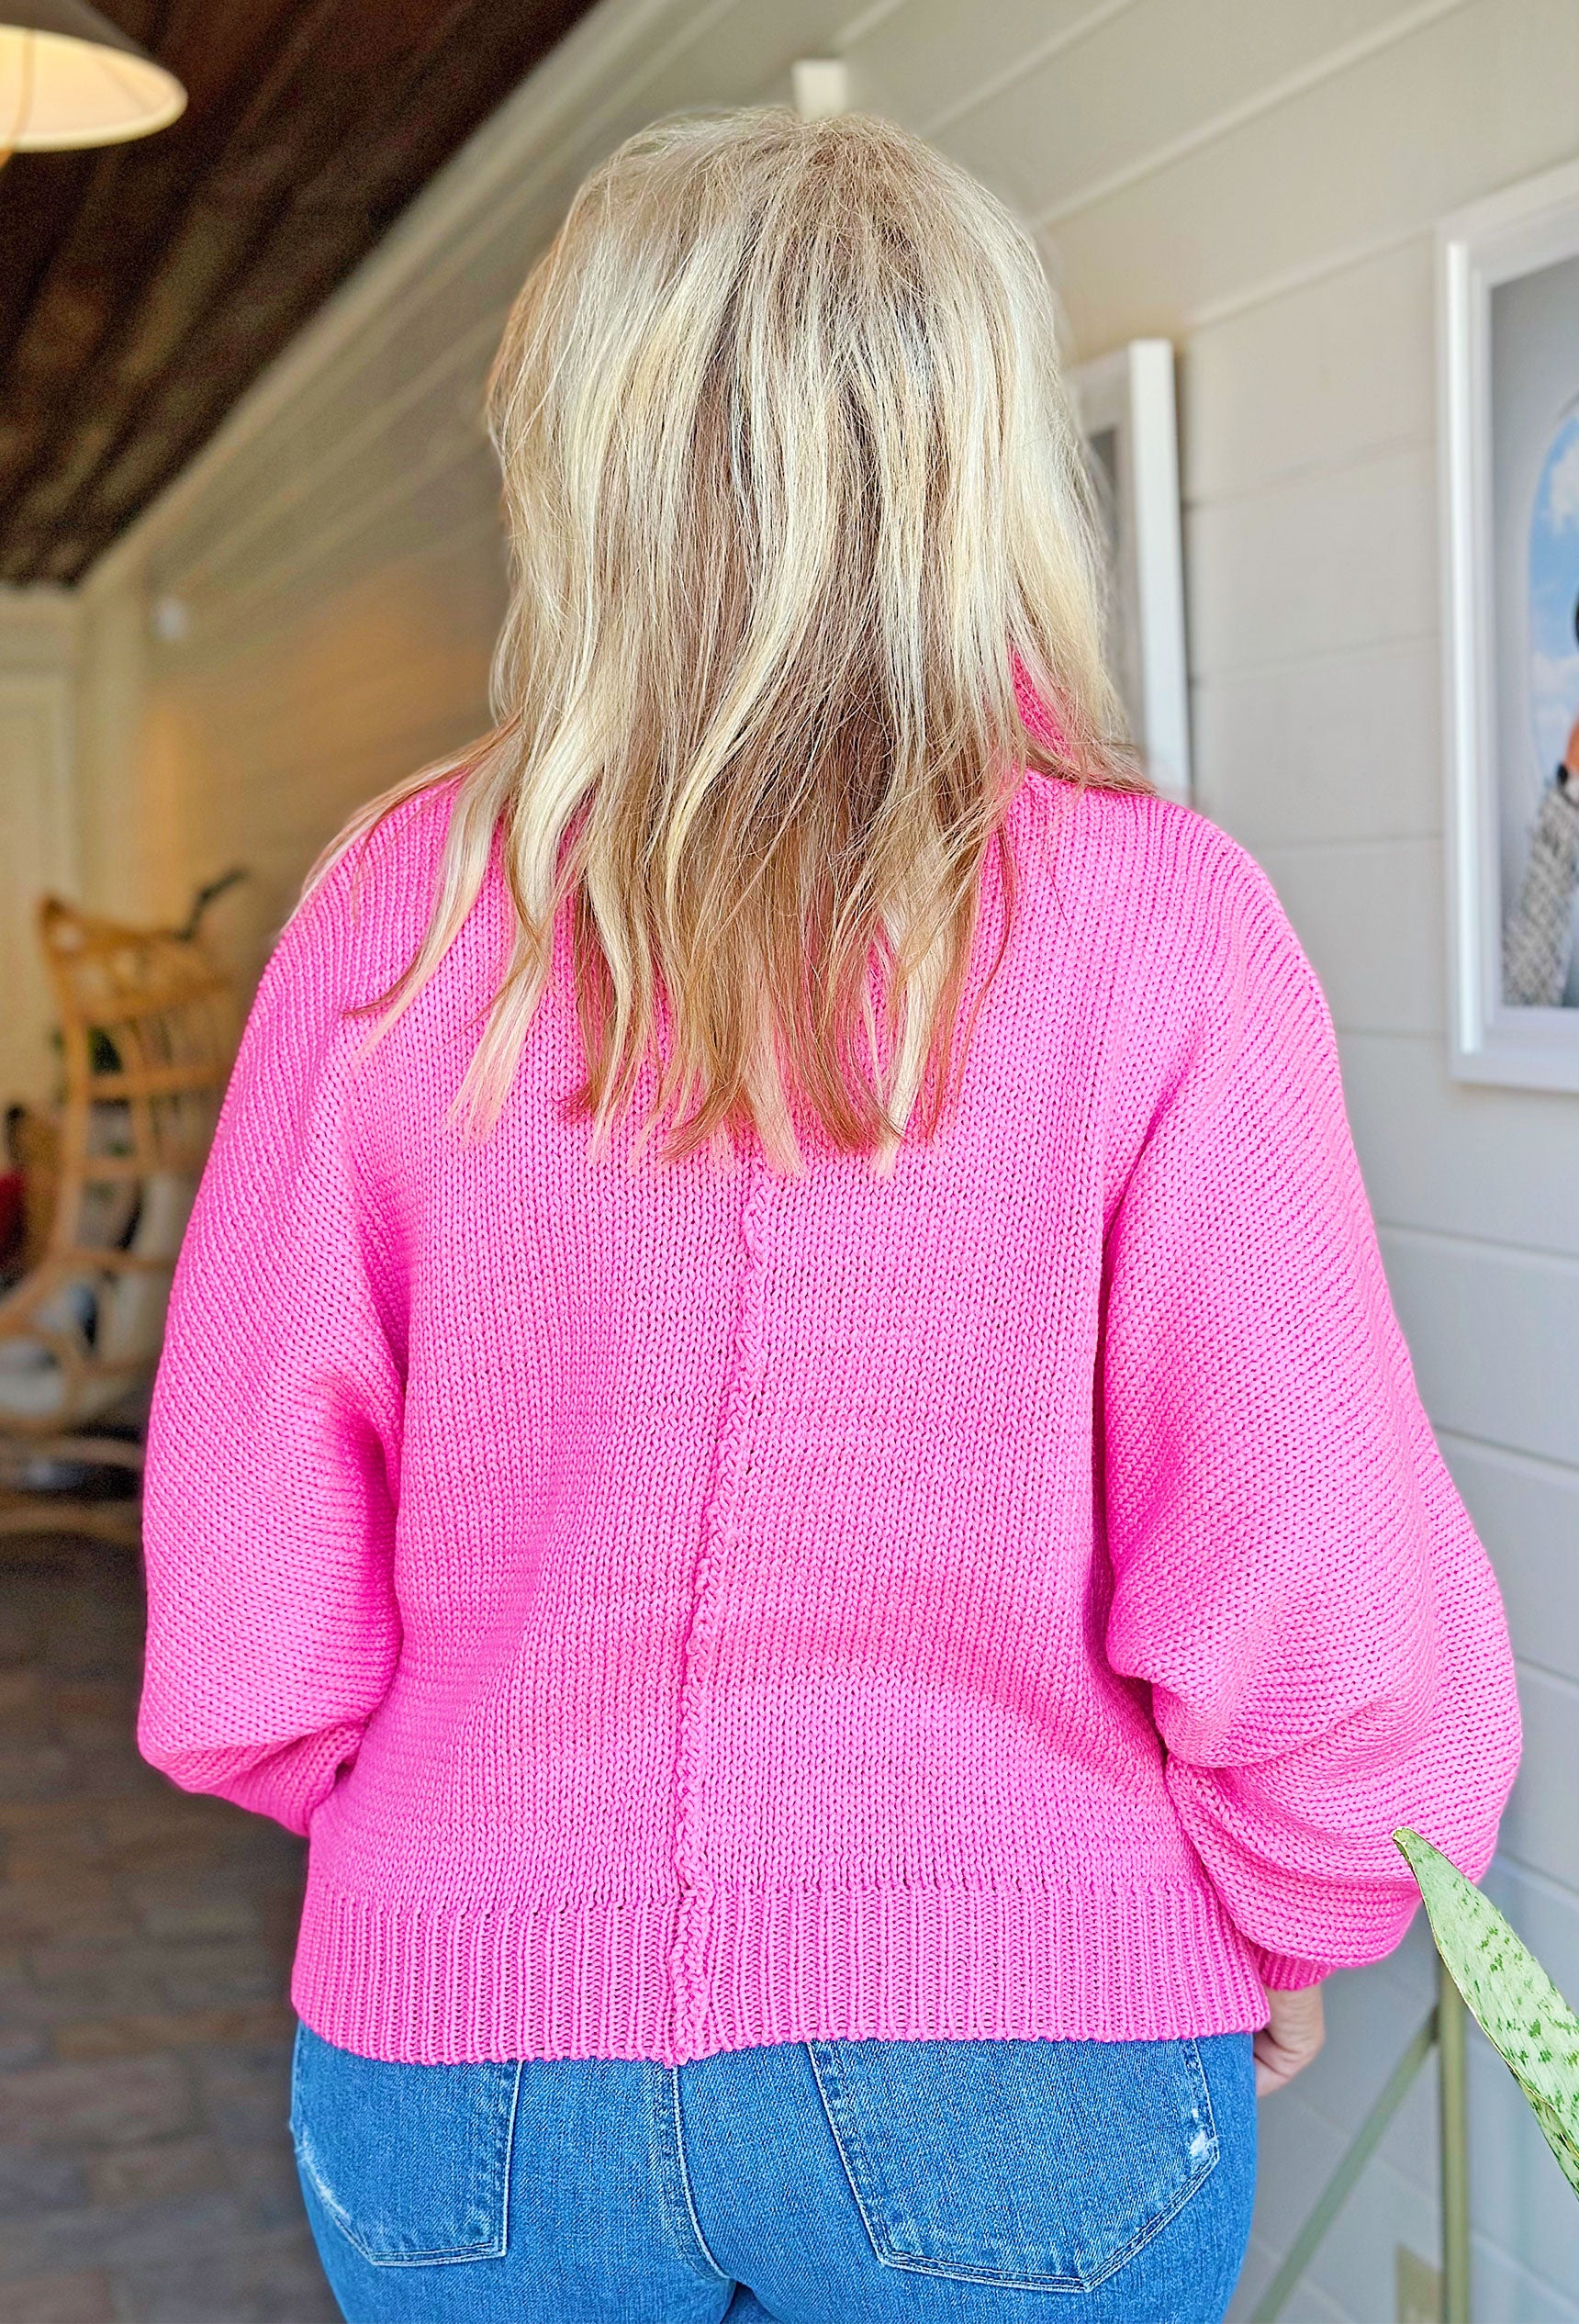 Feeling Sparks Pearl Sweater in Pink, pink knitted sweater, pearl button up, exposed seam 